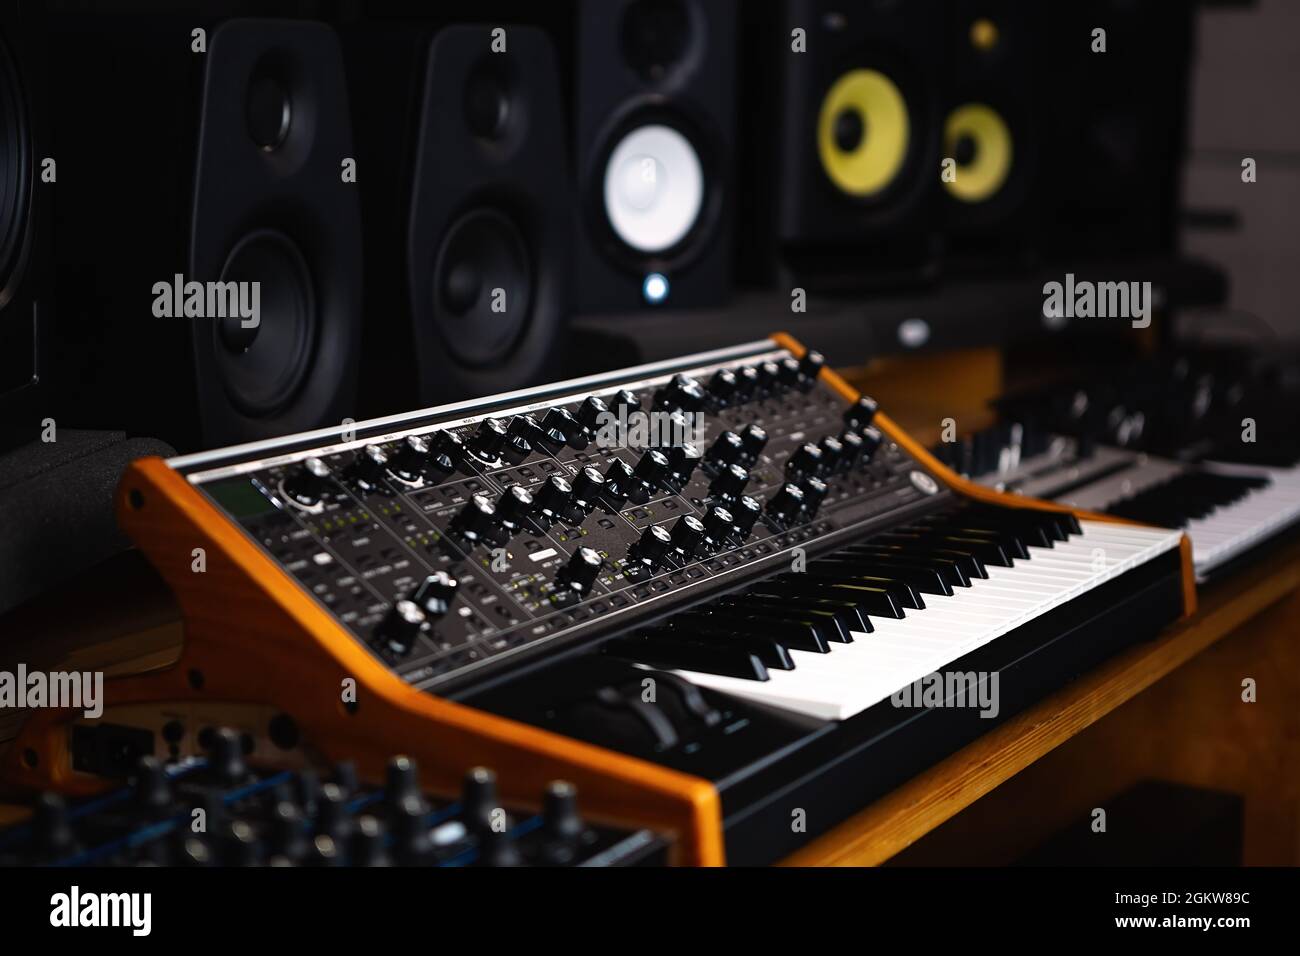 Analog synthesizer in dj store. Buy new professional synth device for electronic music production in musical shop. Stock Photo